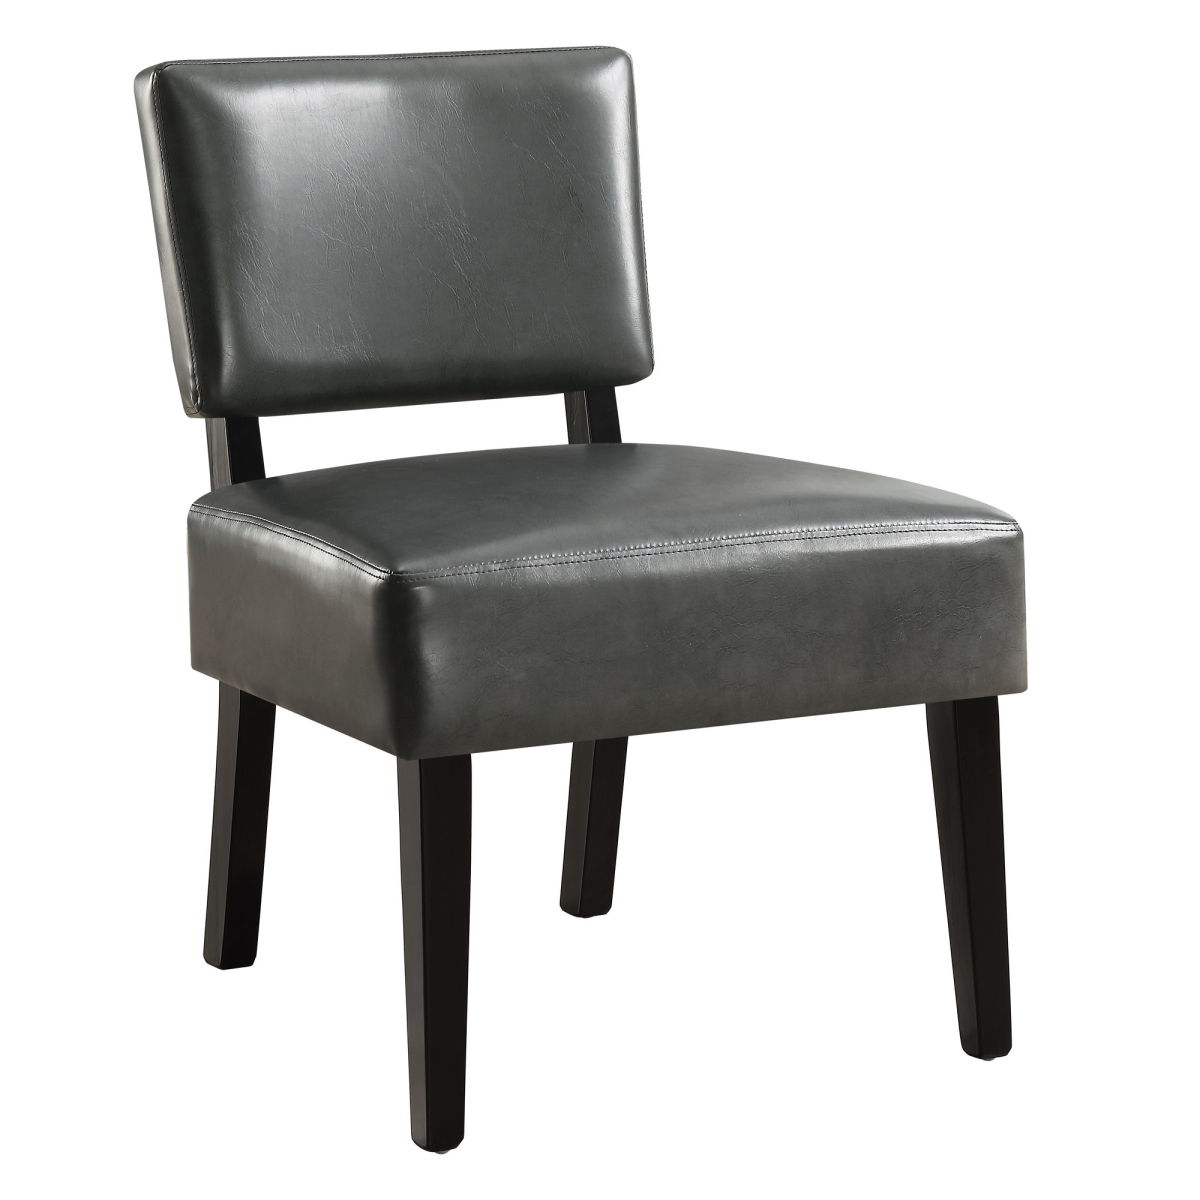 I 8285 Accent Chair, Charcoal Grey Leather, Look Fabric